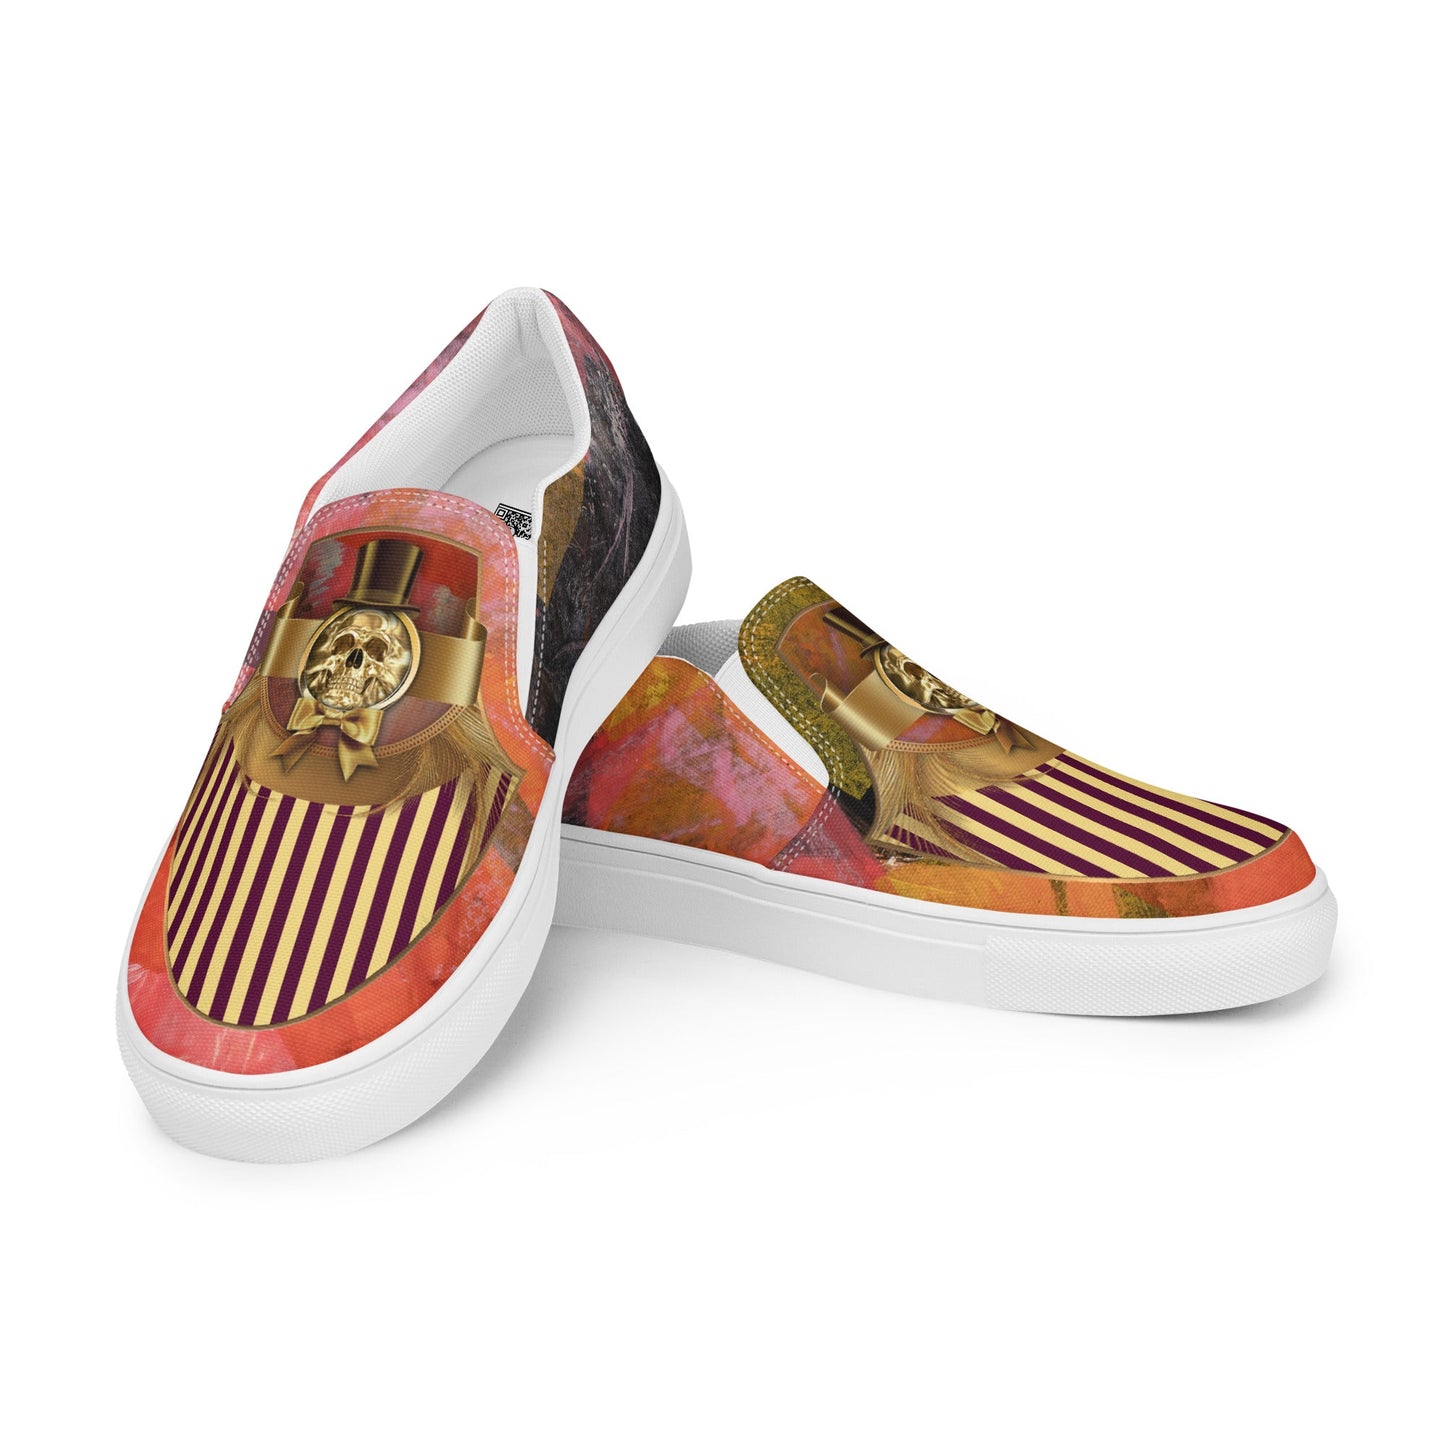 klasneakers Men’s slip-on canvas shoes - Gold Skull on Abstract